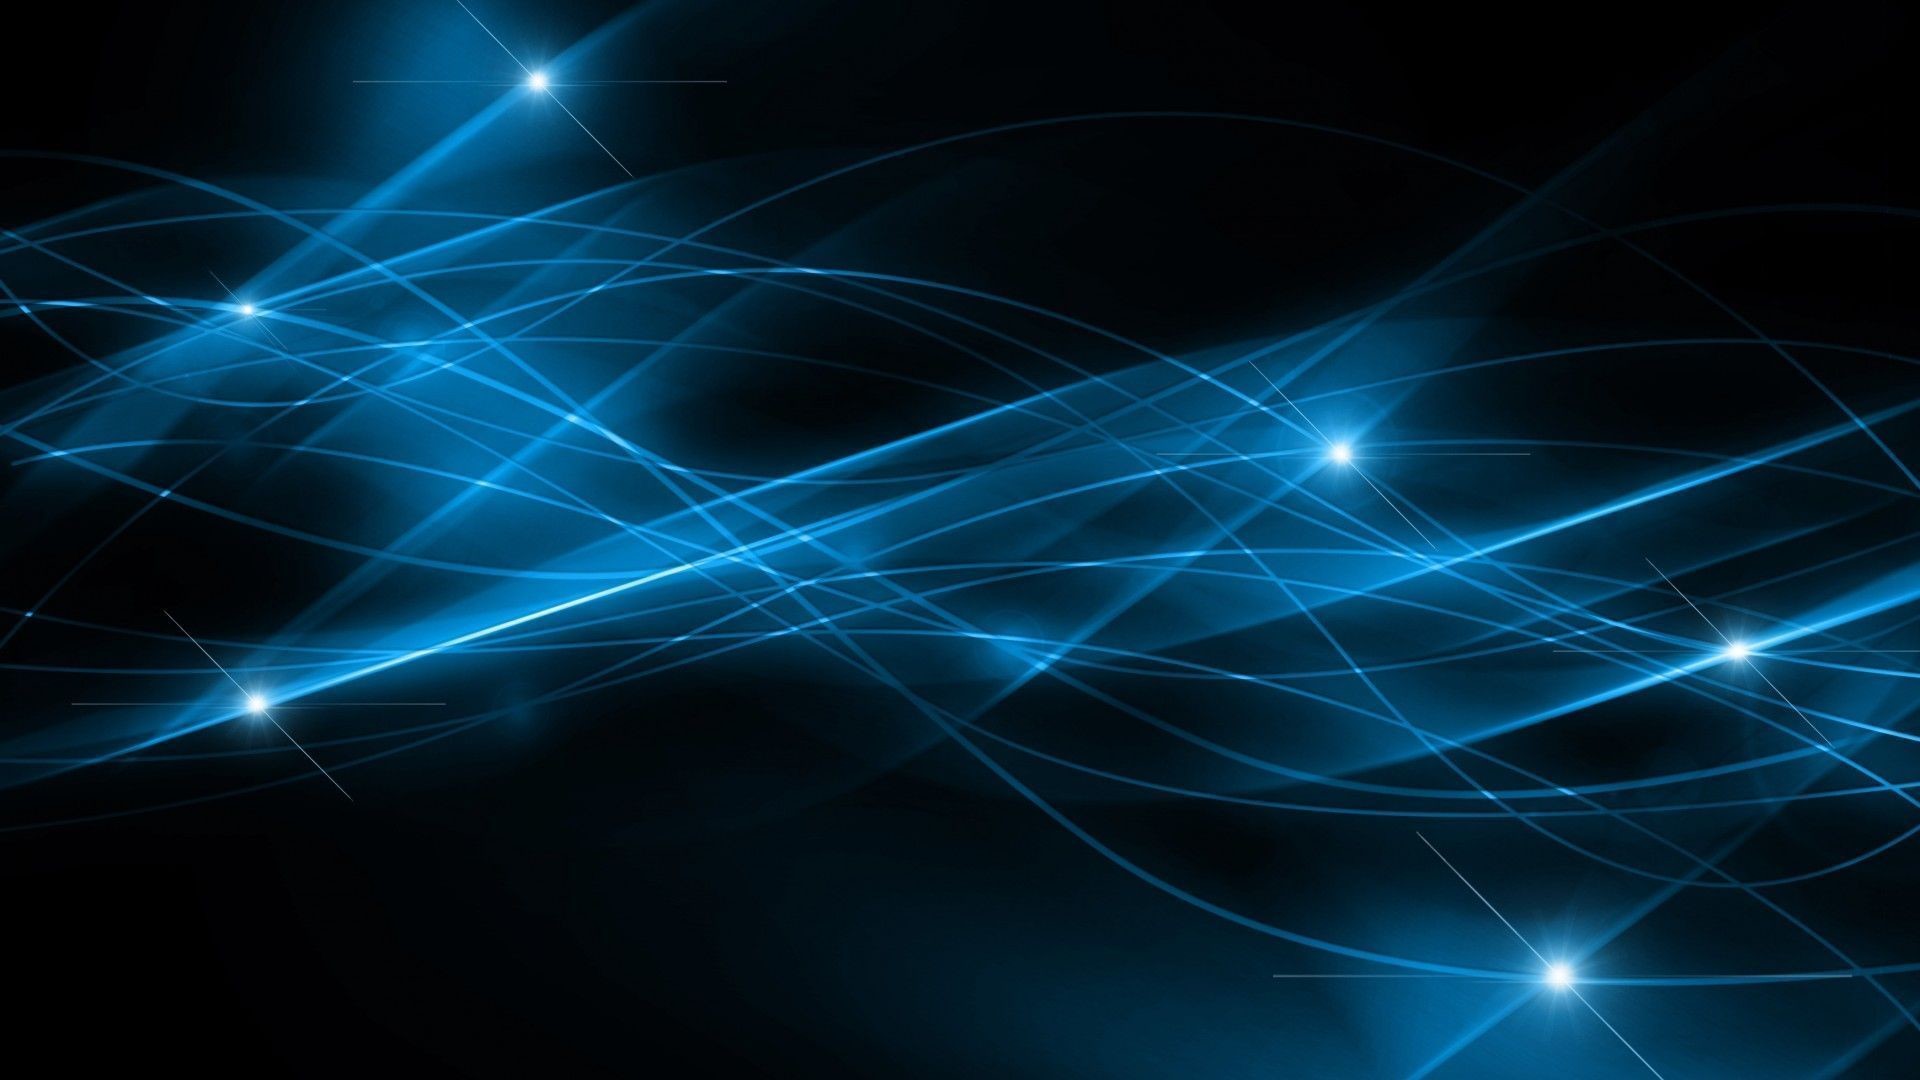 1920x1080 Blue Abstract Wallpaper High Quality